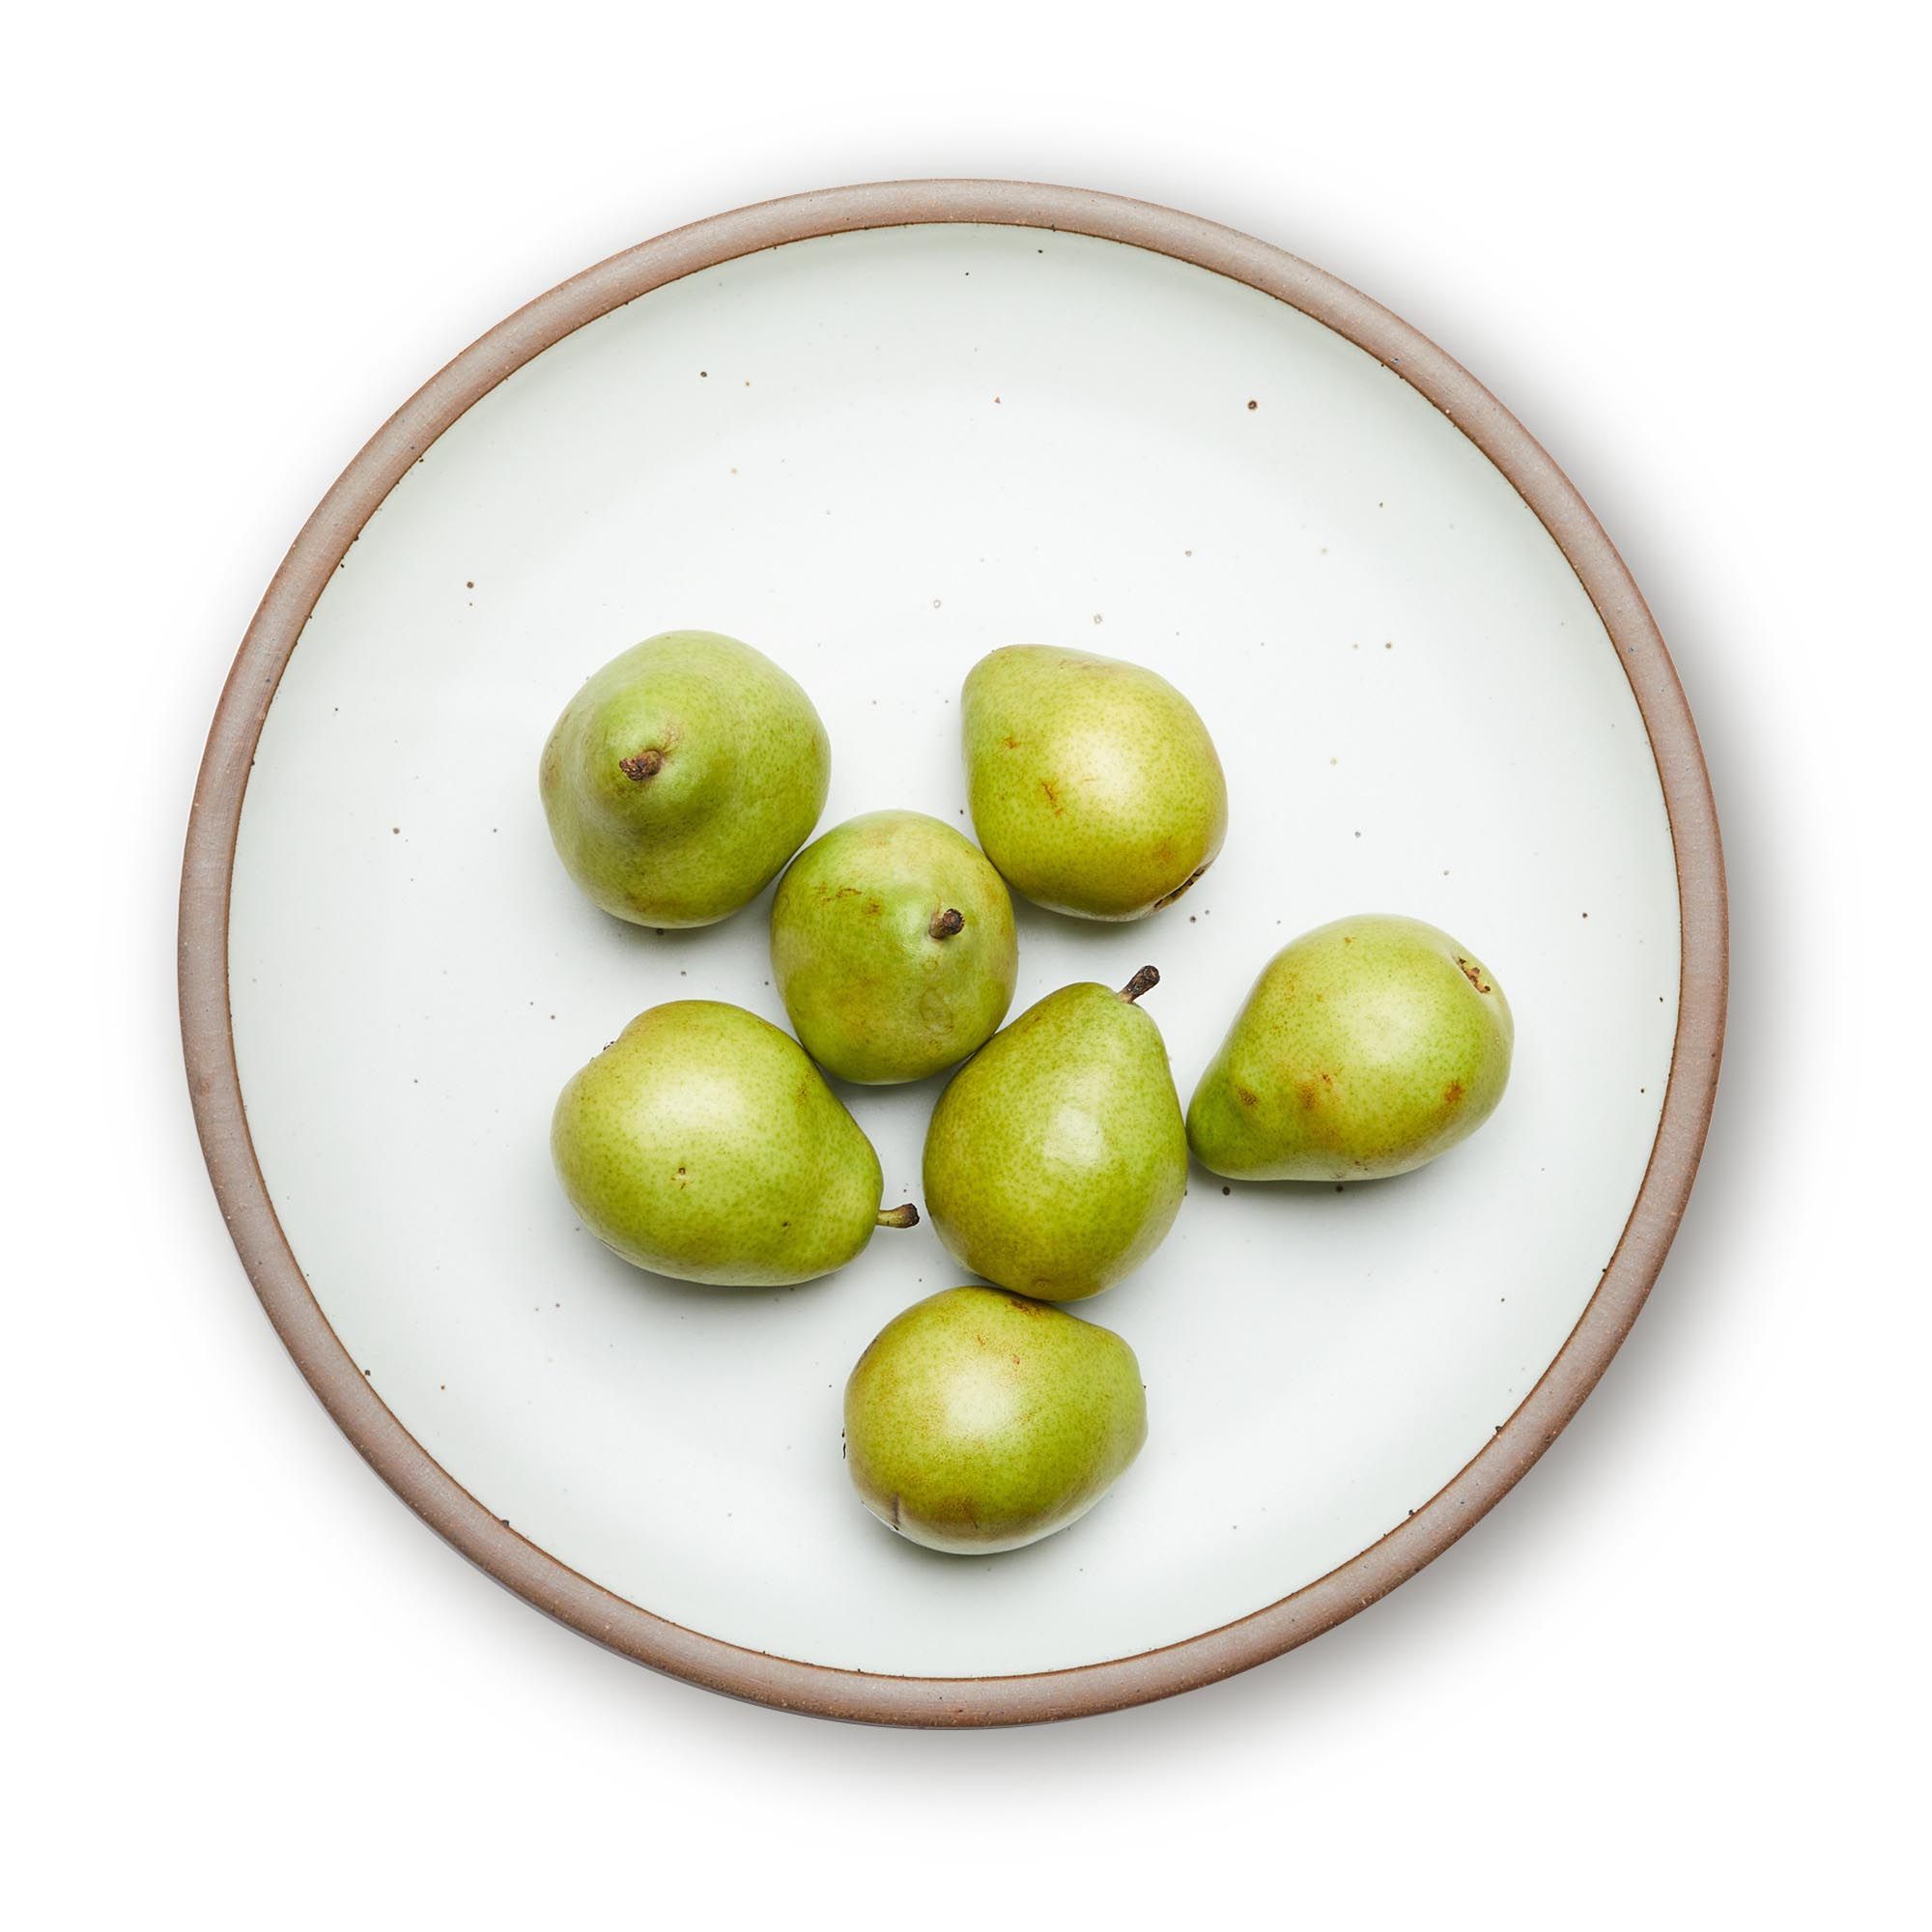 Pears on a large ceramic platter in a cool white color featuring iron speckles and an unglazed rim.